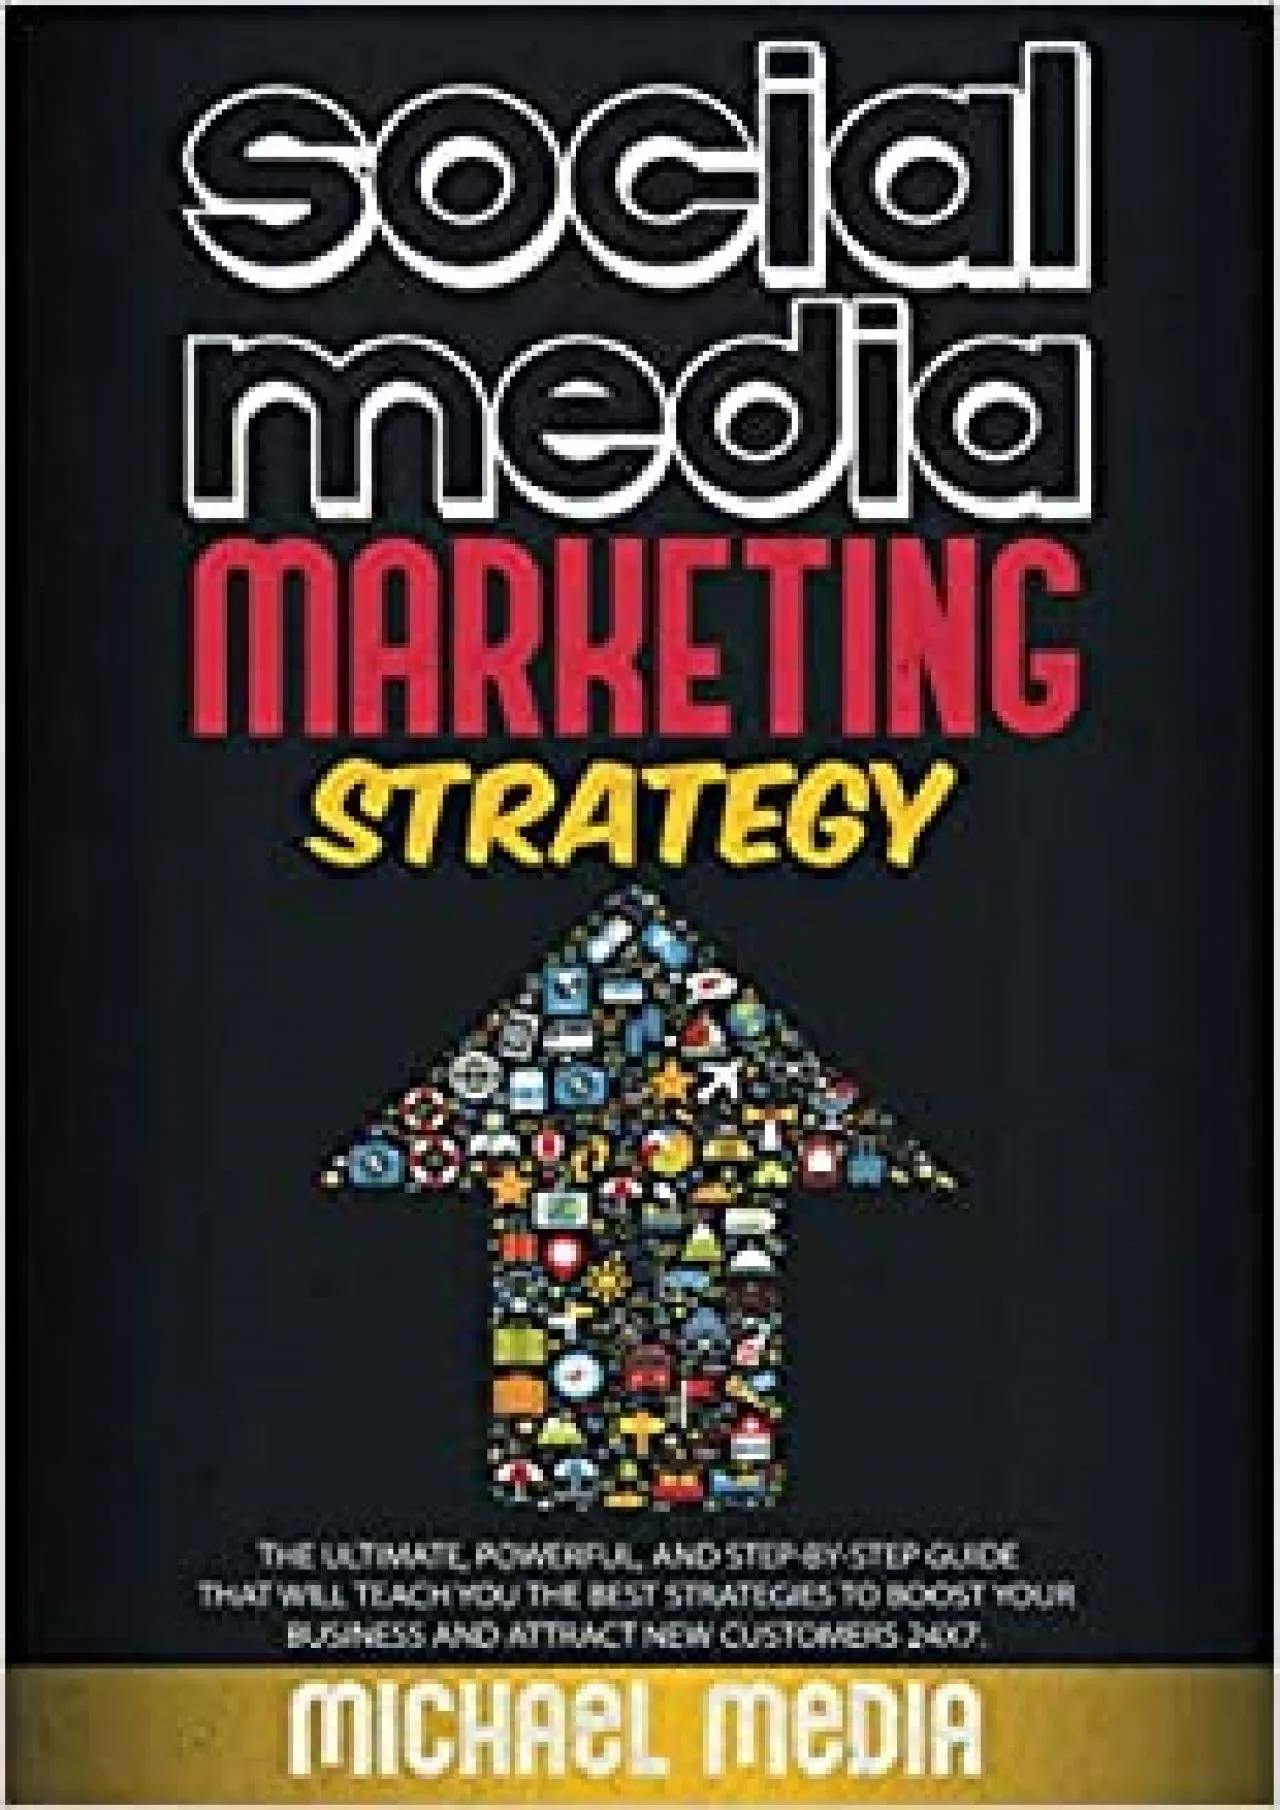 SOCIAL MEDIA MARKETING STRATEGY THE ULTIMATE, POWERFUL, AND STEP-BY-STEP GUIDE THAT WILL